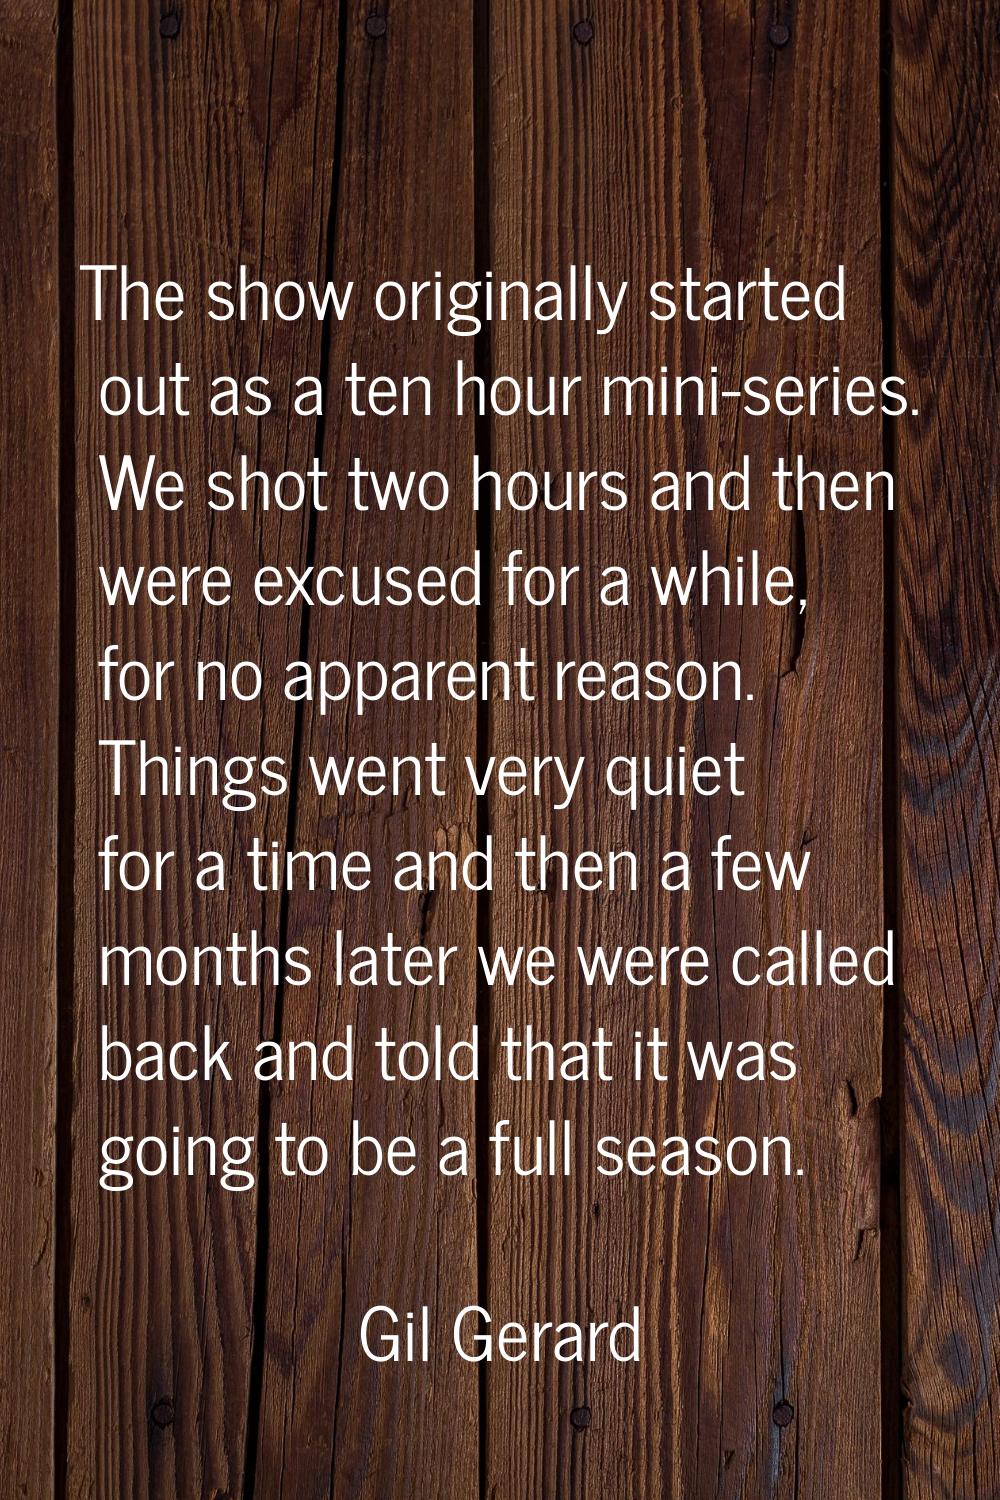 The show originally started out as a ten hour mini-series. We shot two hours and then were excused 